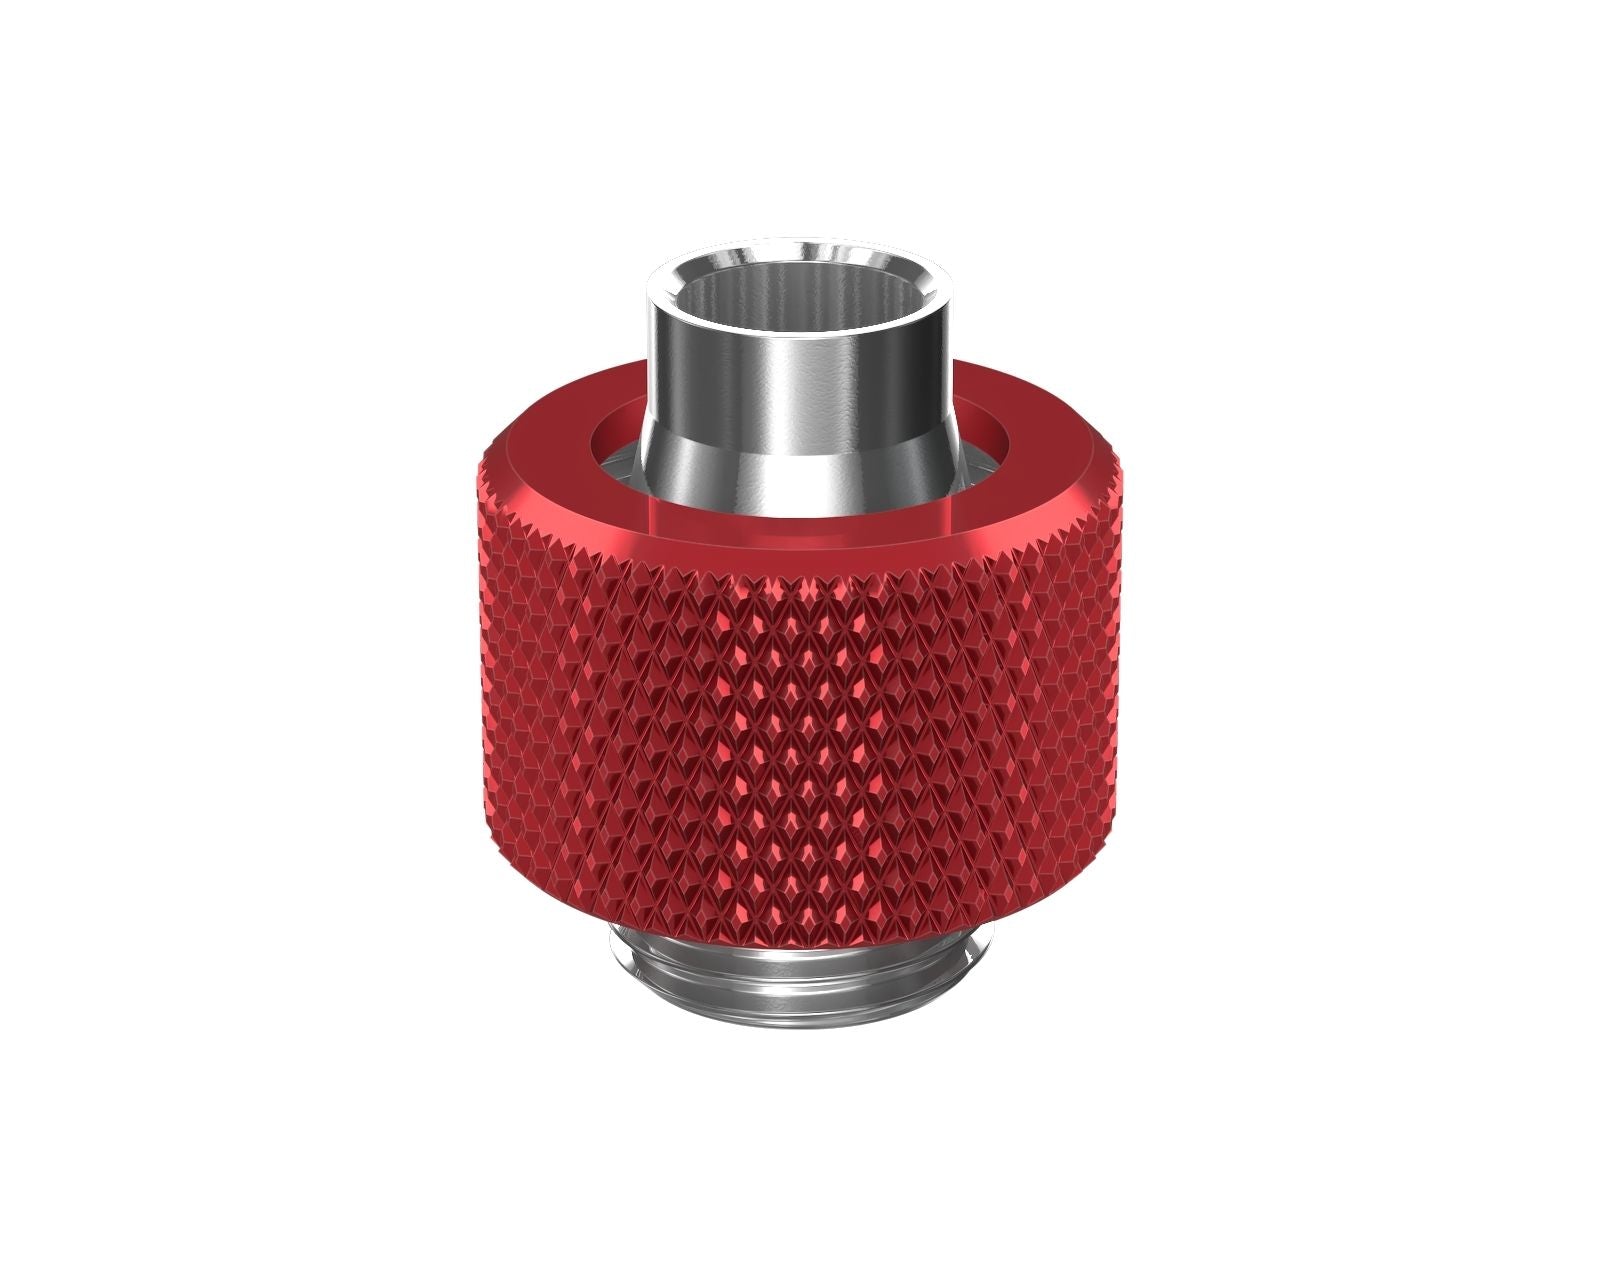 PrimoChill SecureFit SX - Premium Compression Fitting For 3/8in ID x 1/2in OD Flexible Tubing (F-SFSX12) - Available in 20+ Colors, Custom Watercooling Loop Ready - Candy Red